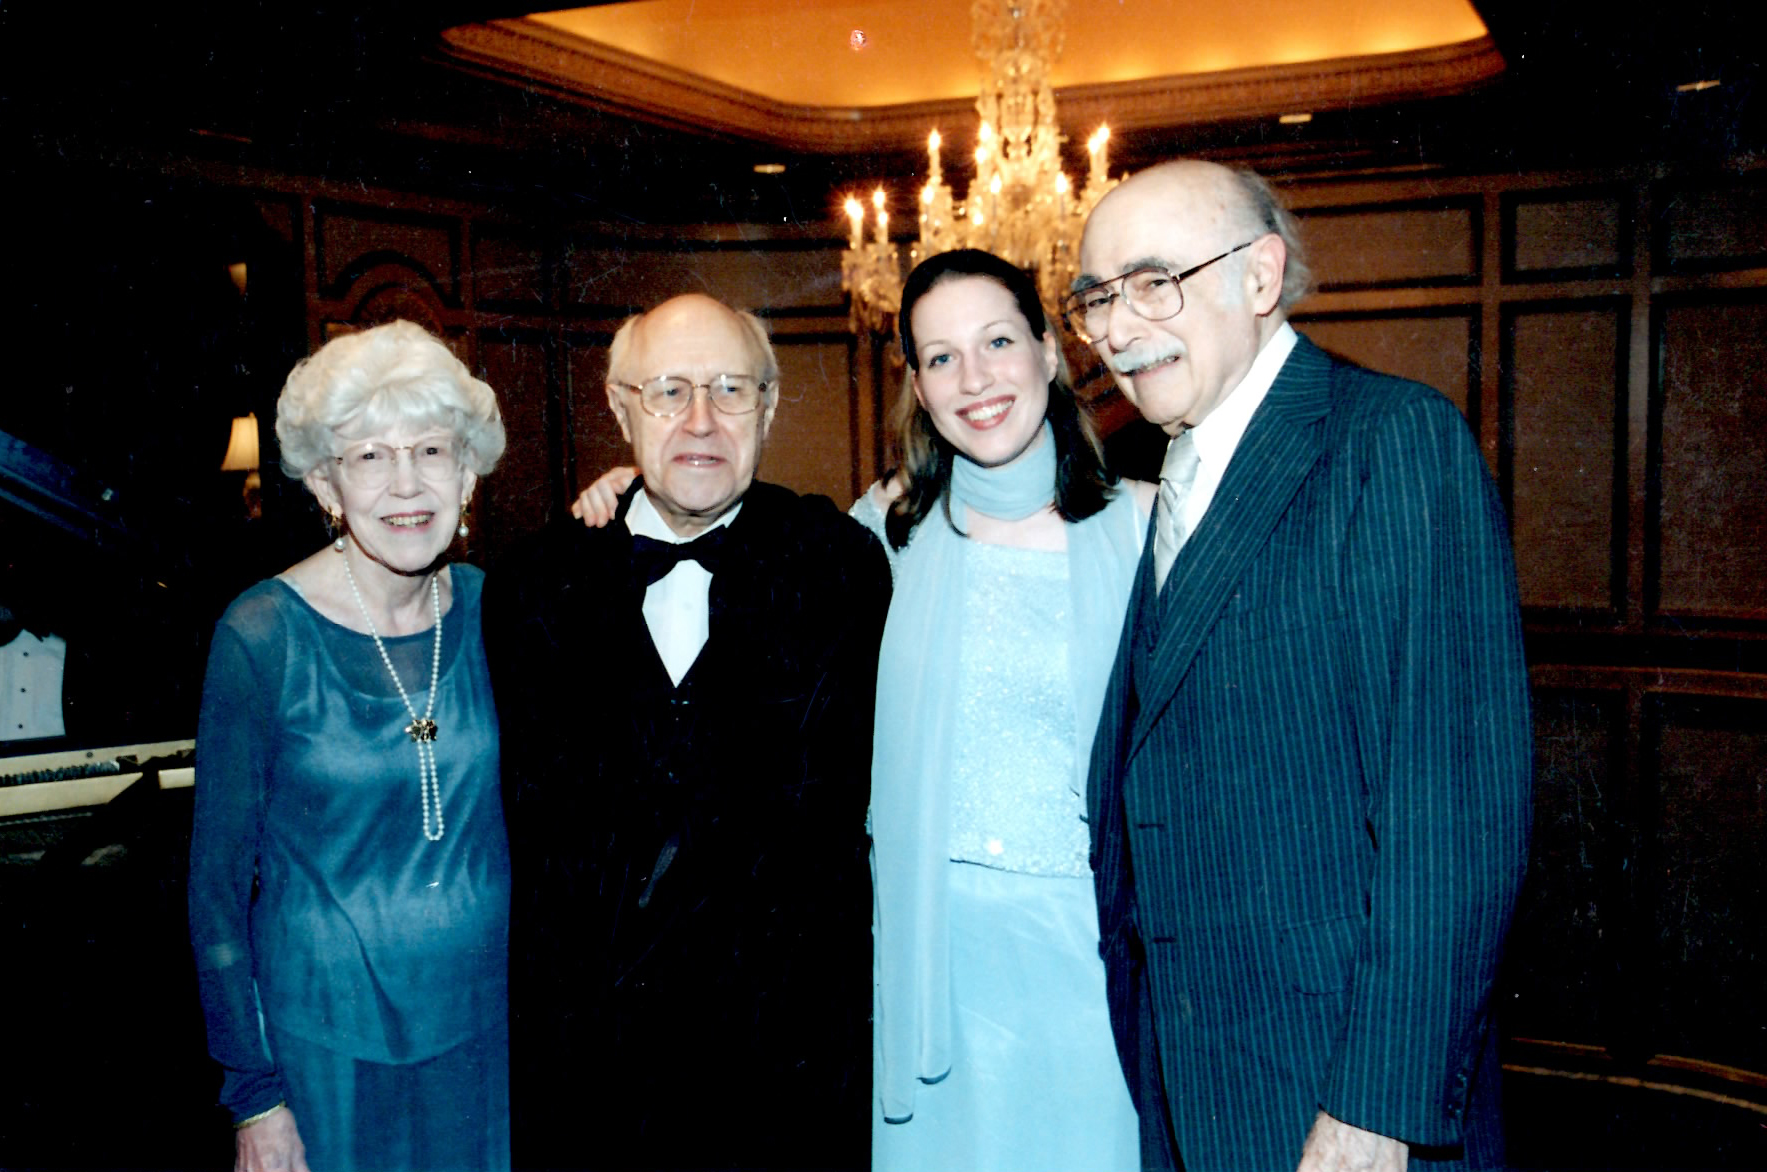  All of my teachers in one photo. From left to right: Nell Novak, Mstislav Rostropovich, myself, and Kalman Novak 